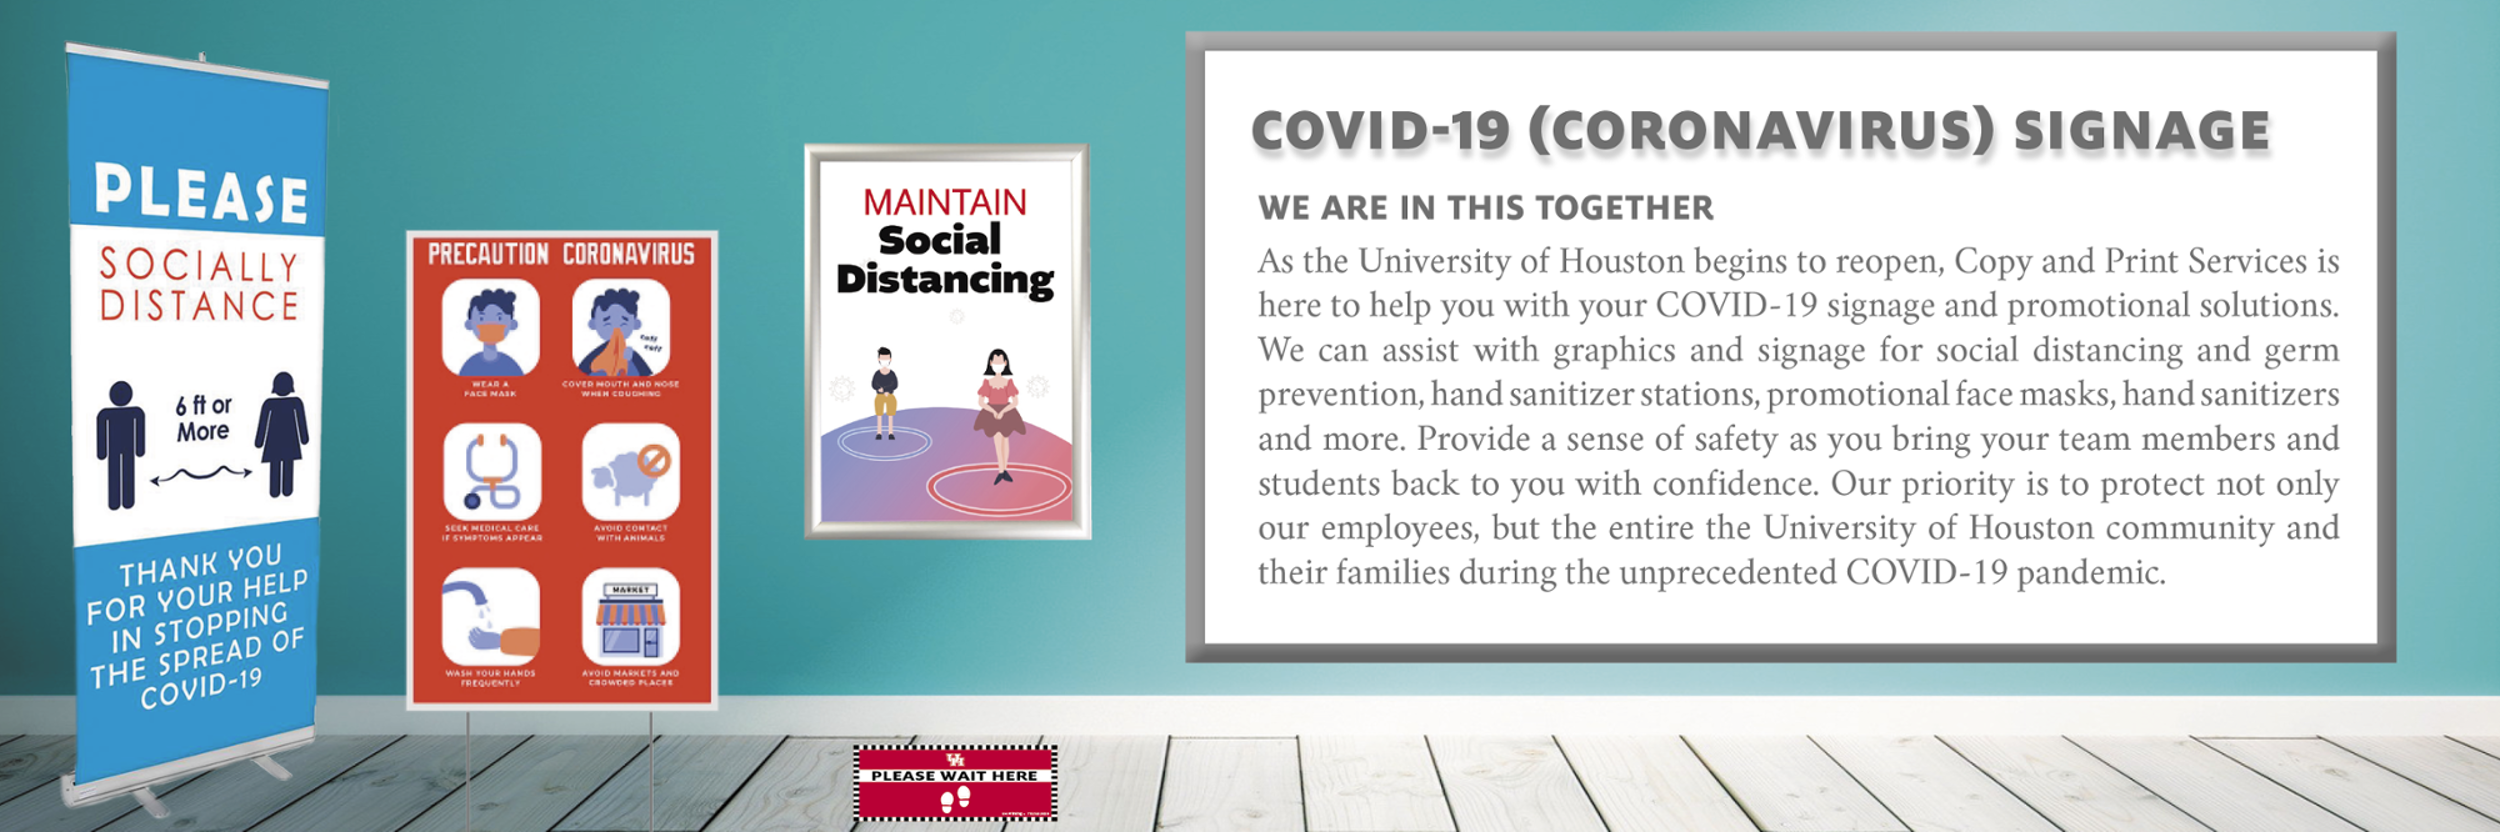 covid19-signage-banner2.png